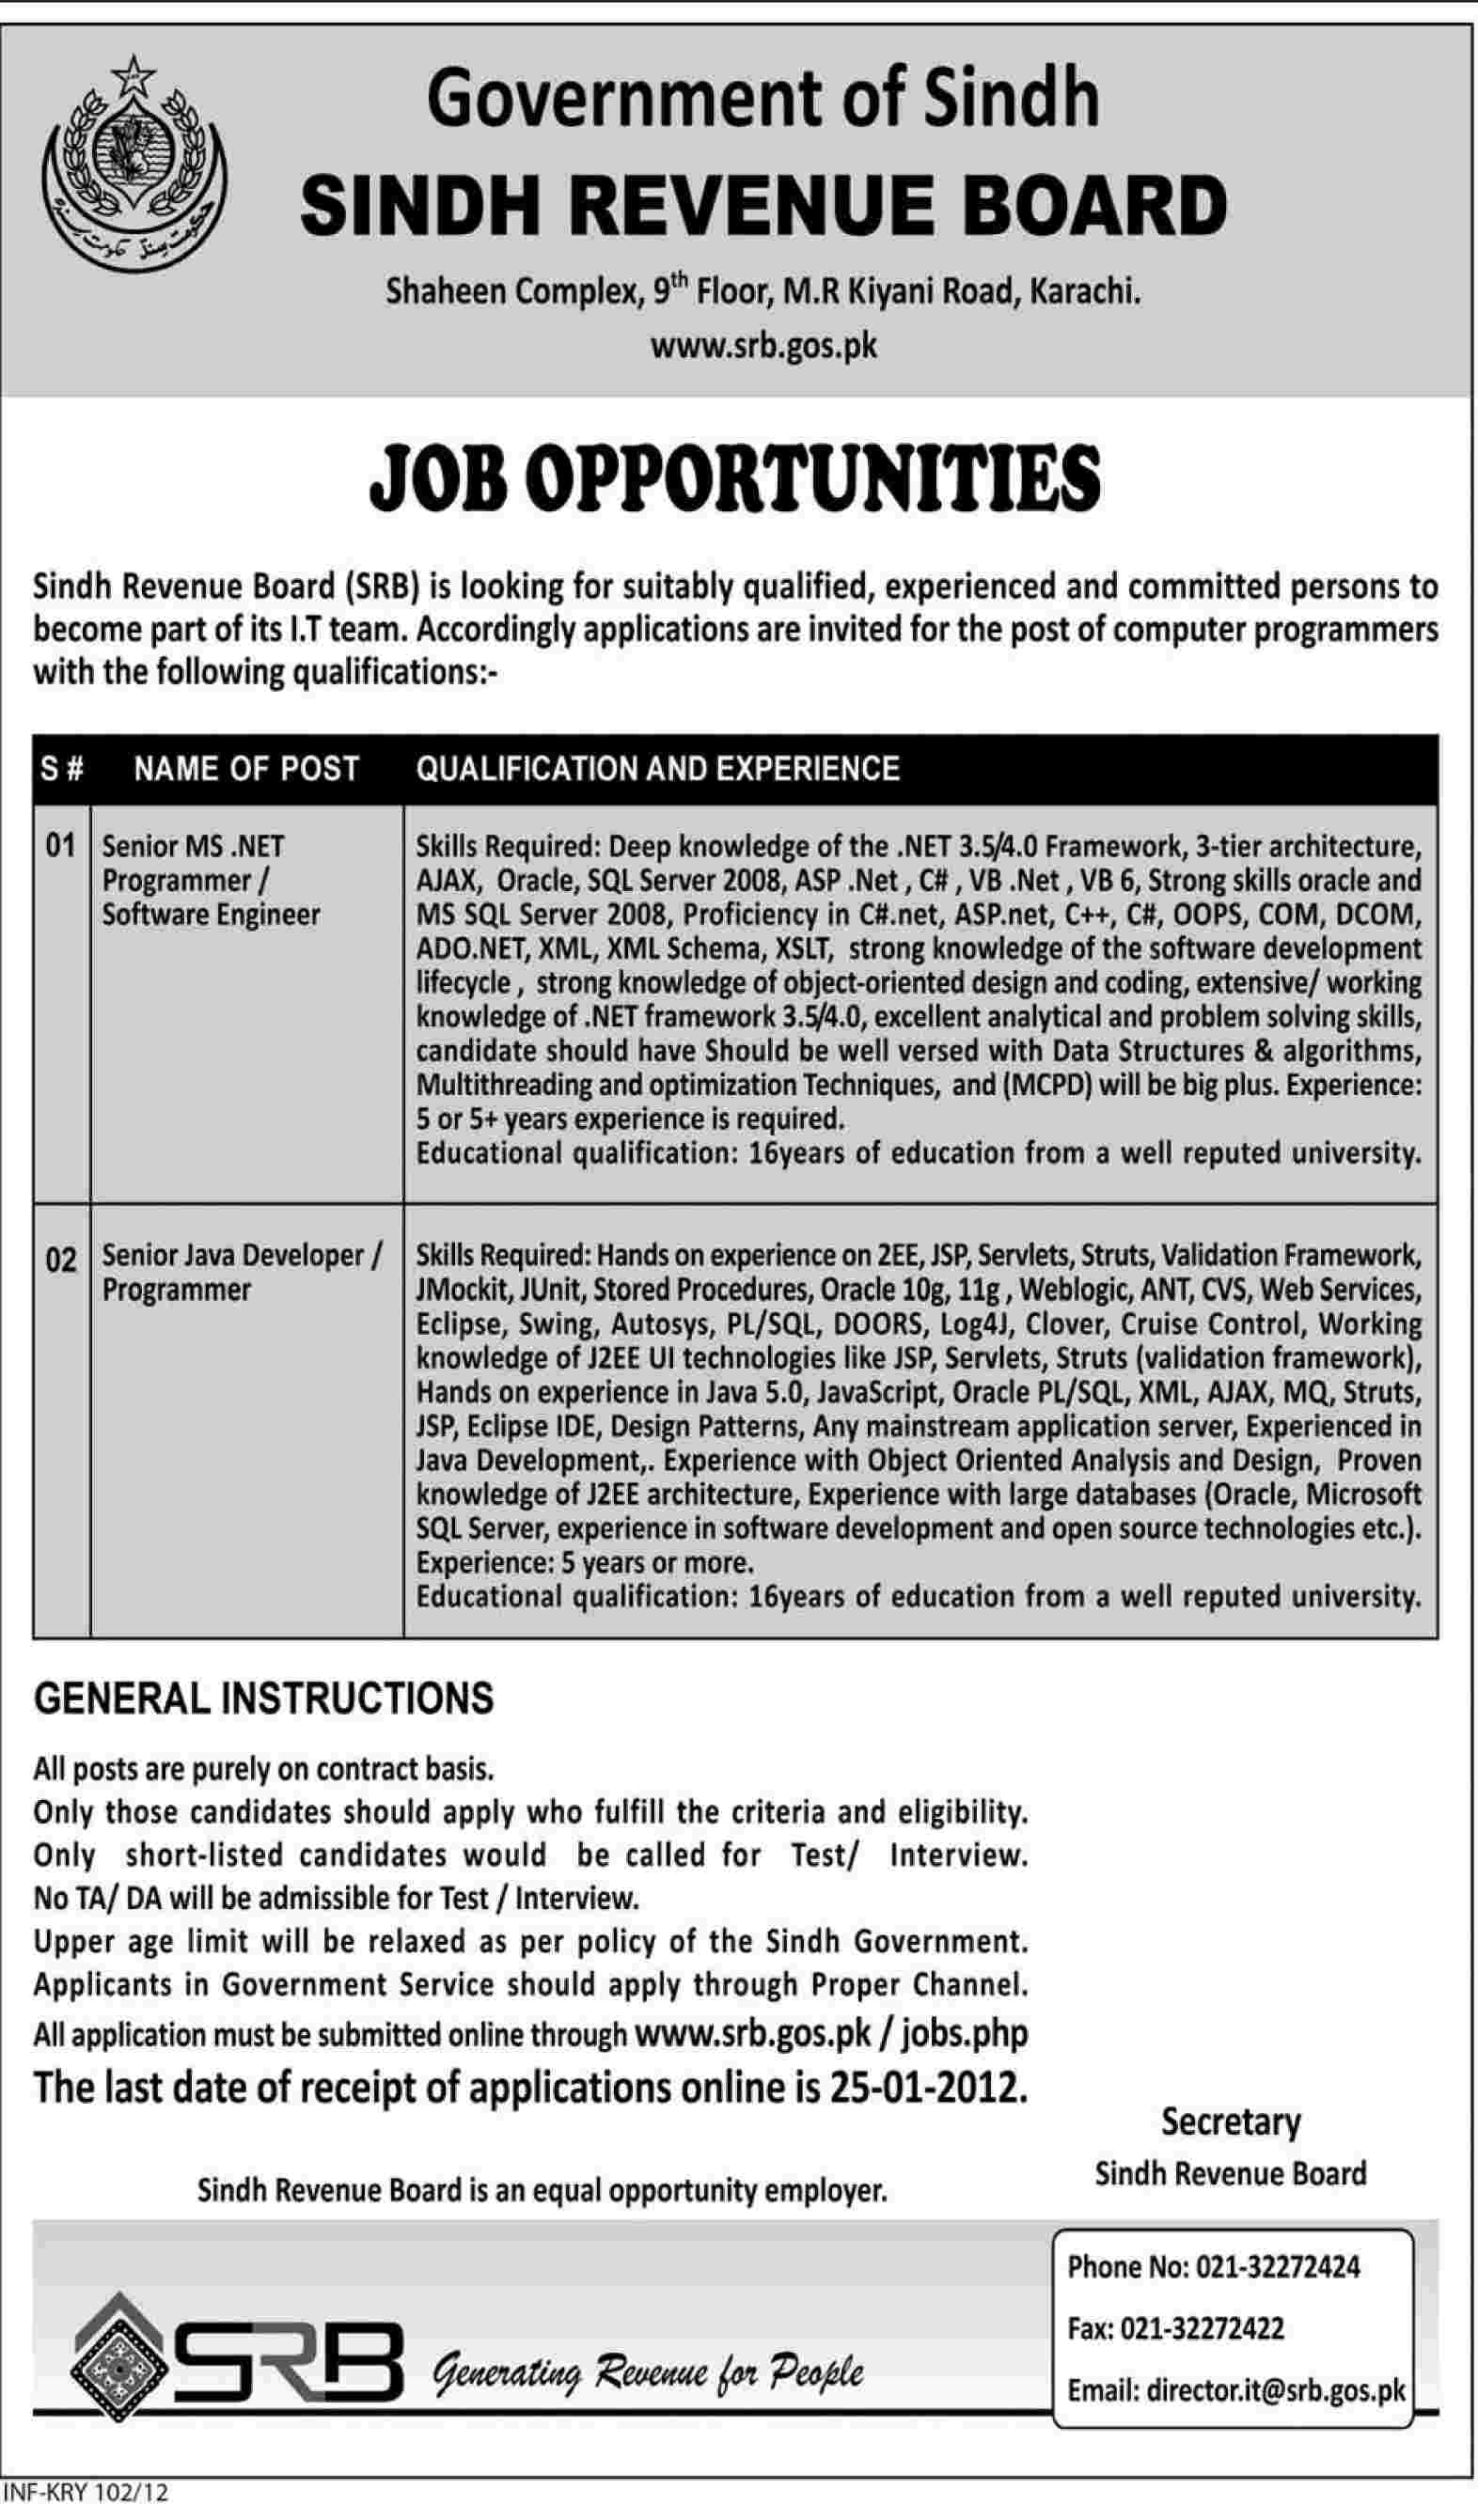 Sindh Revenue Board, Government of Sindh Jobs Opportunity